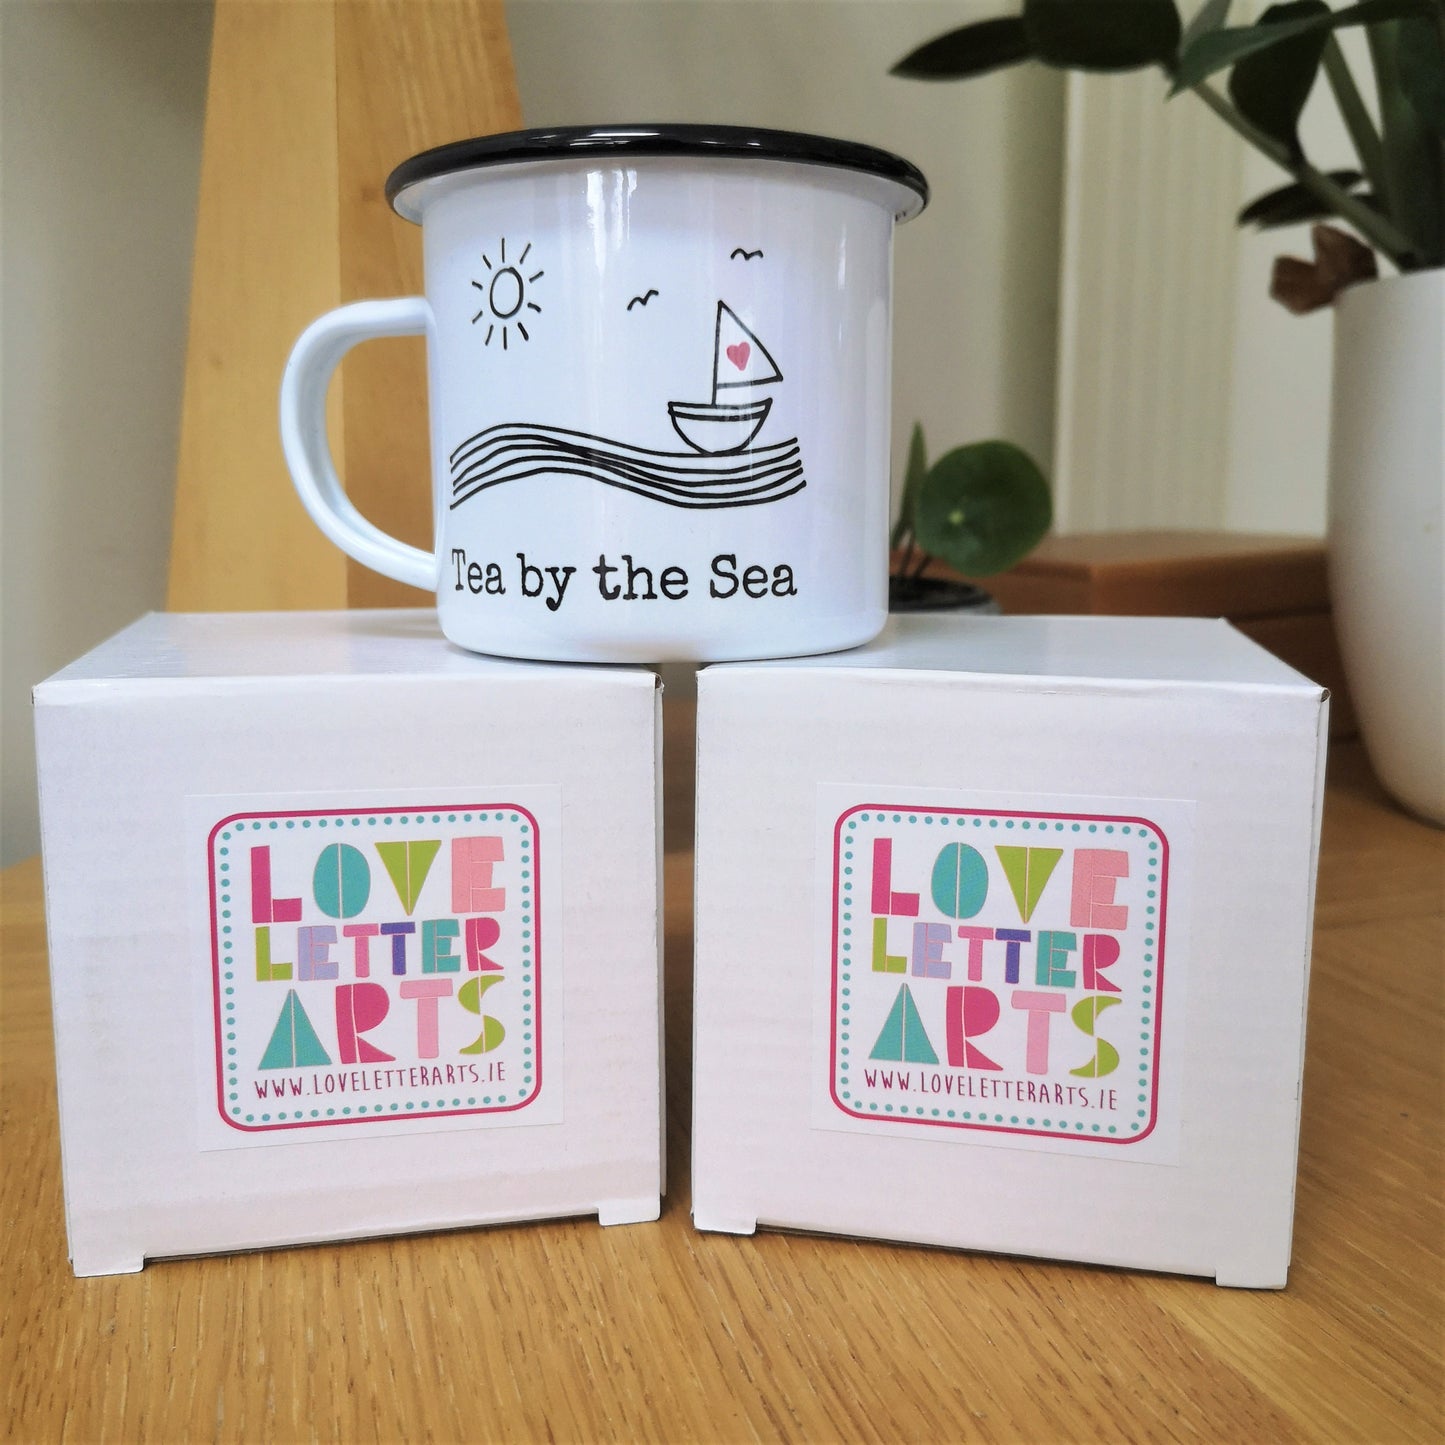 A photo of the cardboard boxes all my mugs come in, with a brightly coloured Love Letter Arts sticker on the top. Perfect for gifting